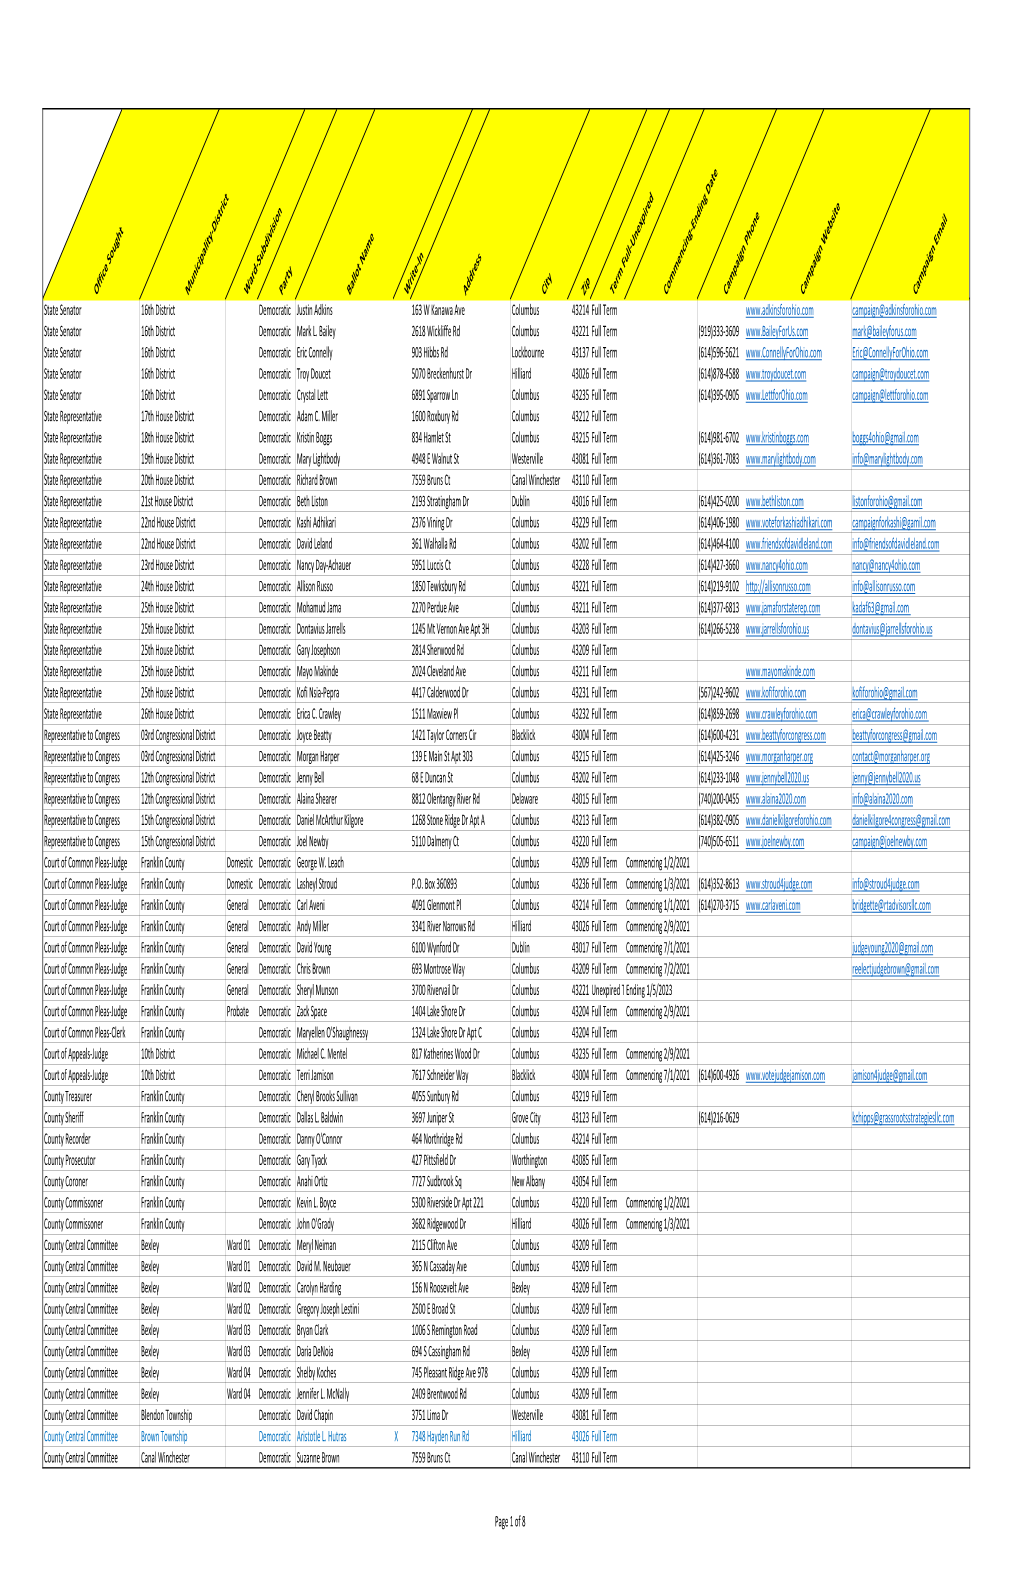 2020 Primary Certified Candidate List (PDF)